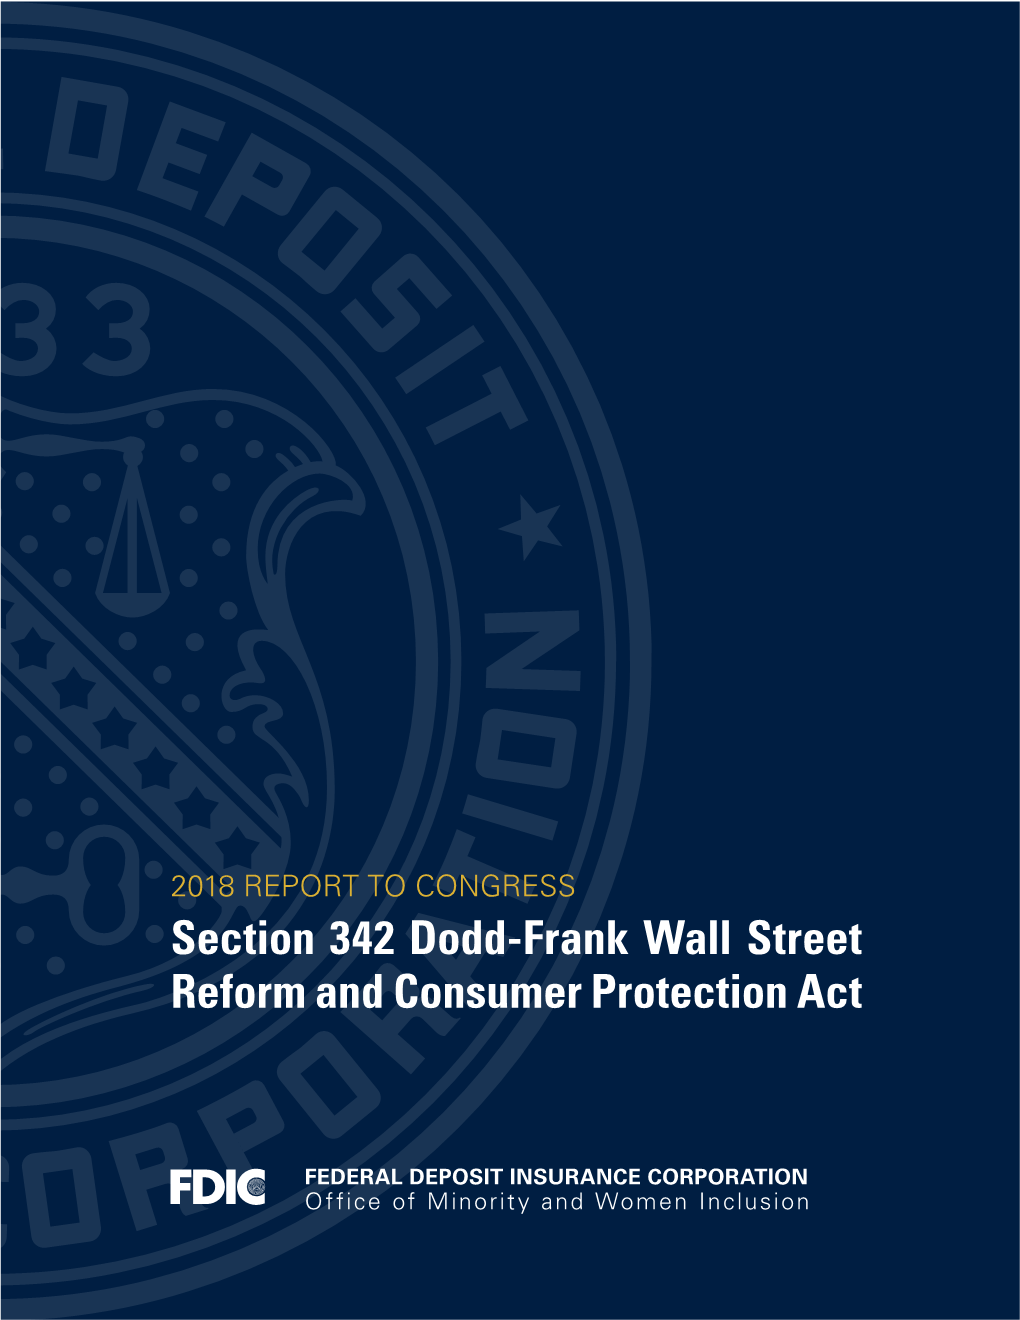 Section 342 Dodd-Frank Wall Street Reform and Consumer Protection Act